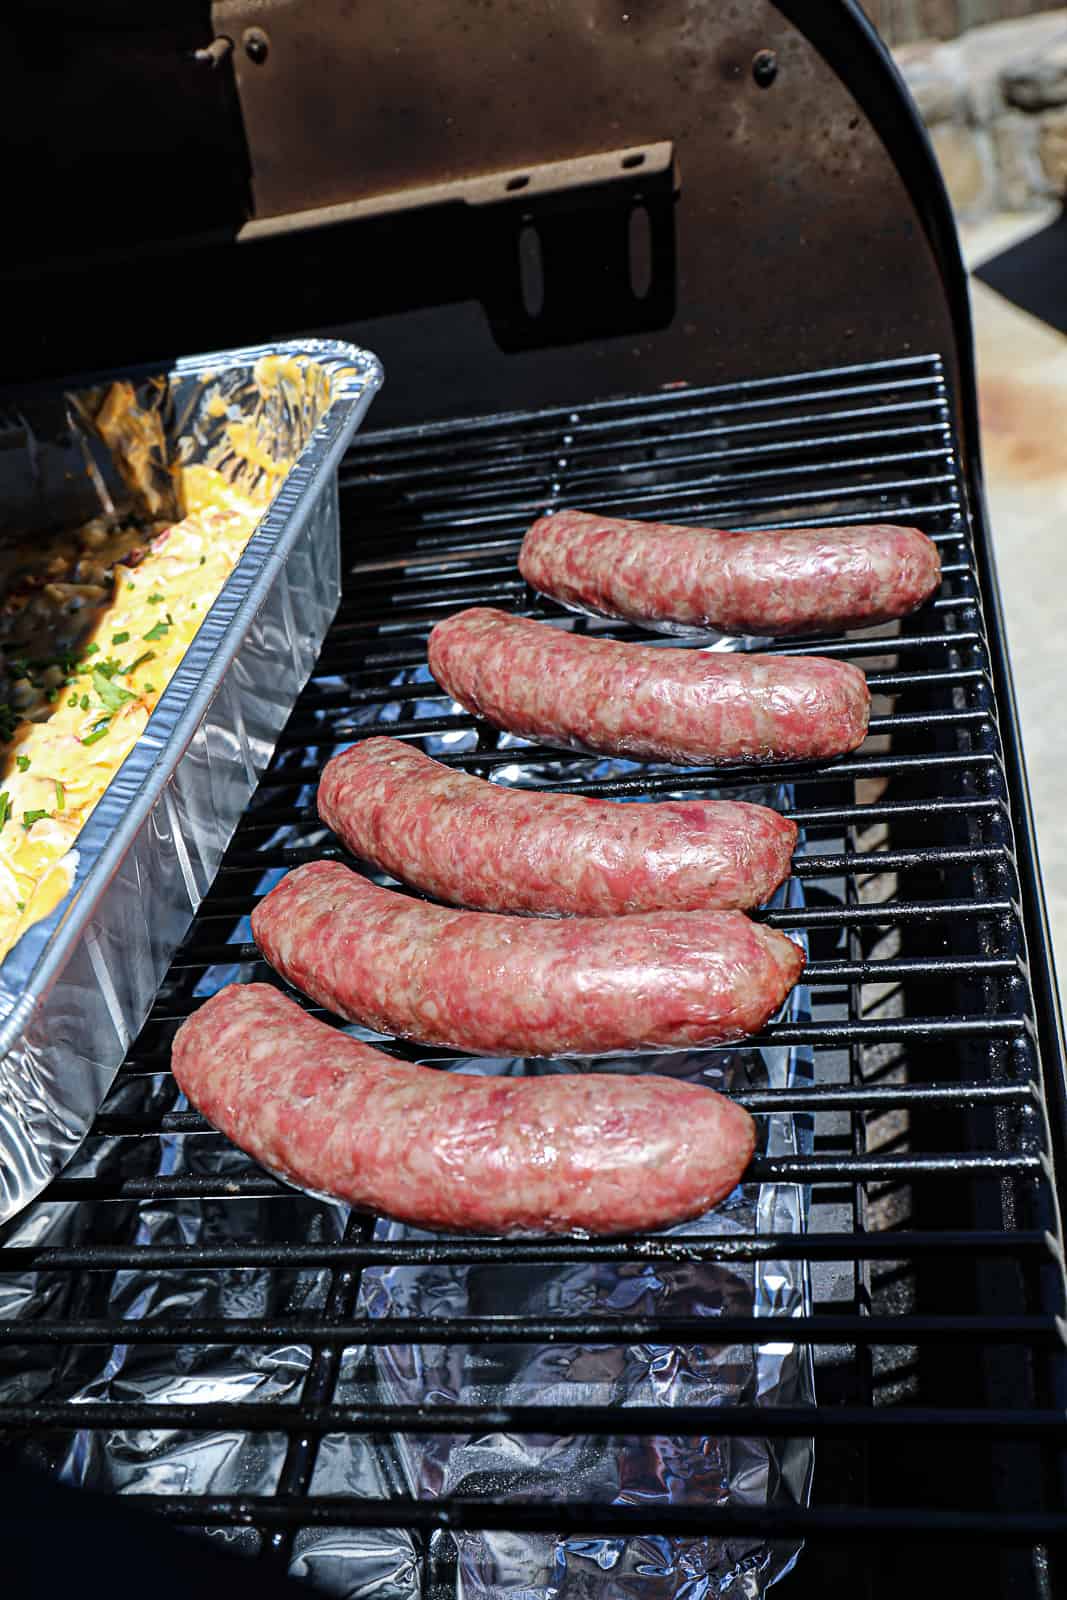 Smoking beer brats on the pellet grill with queso dip appetizer